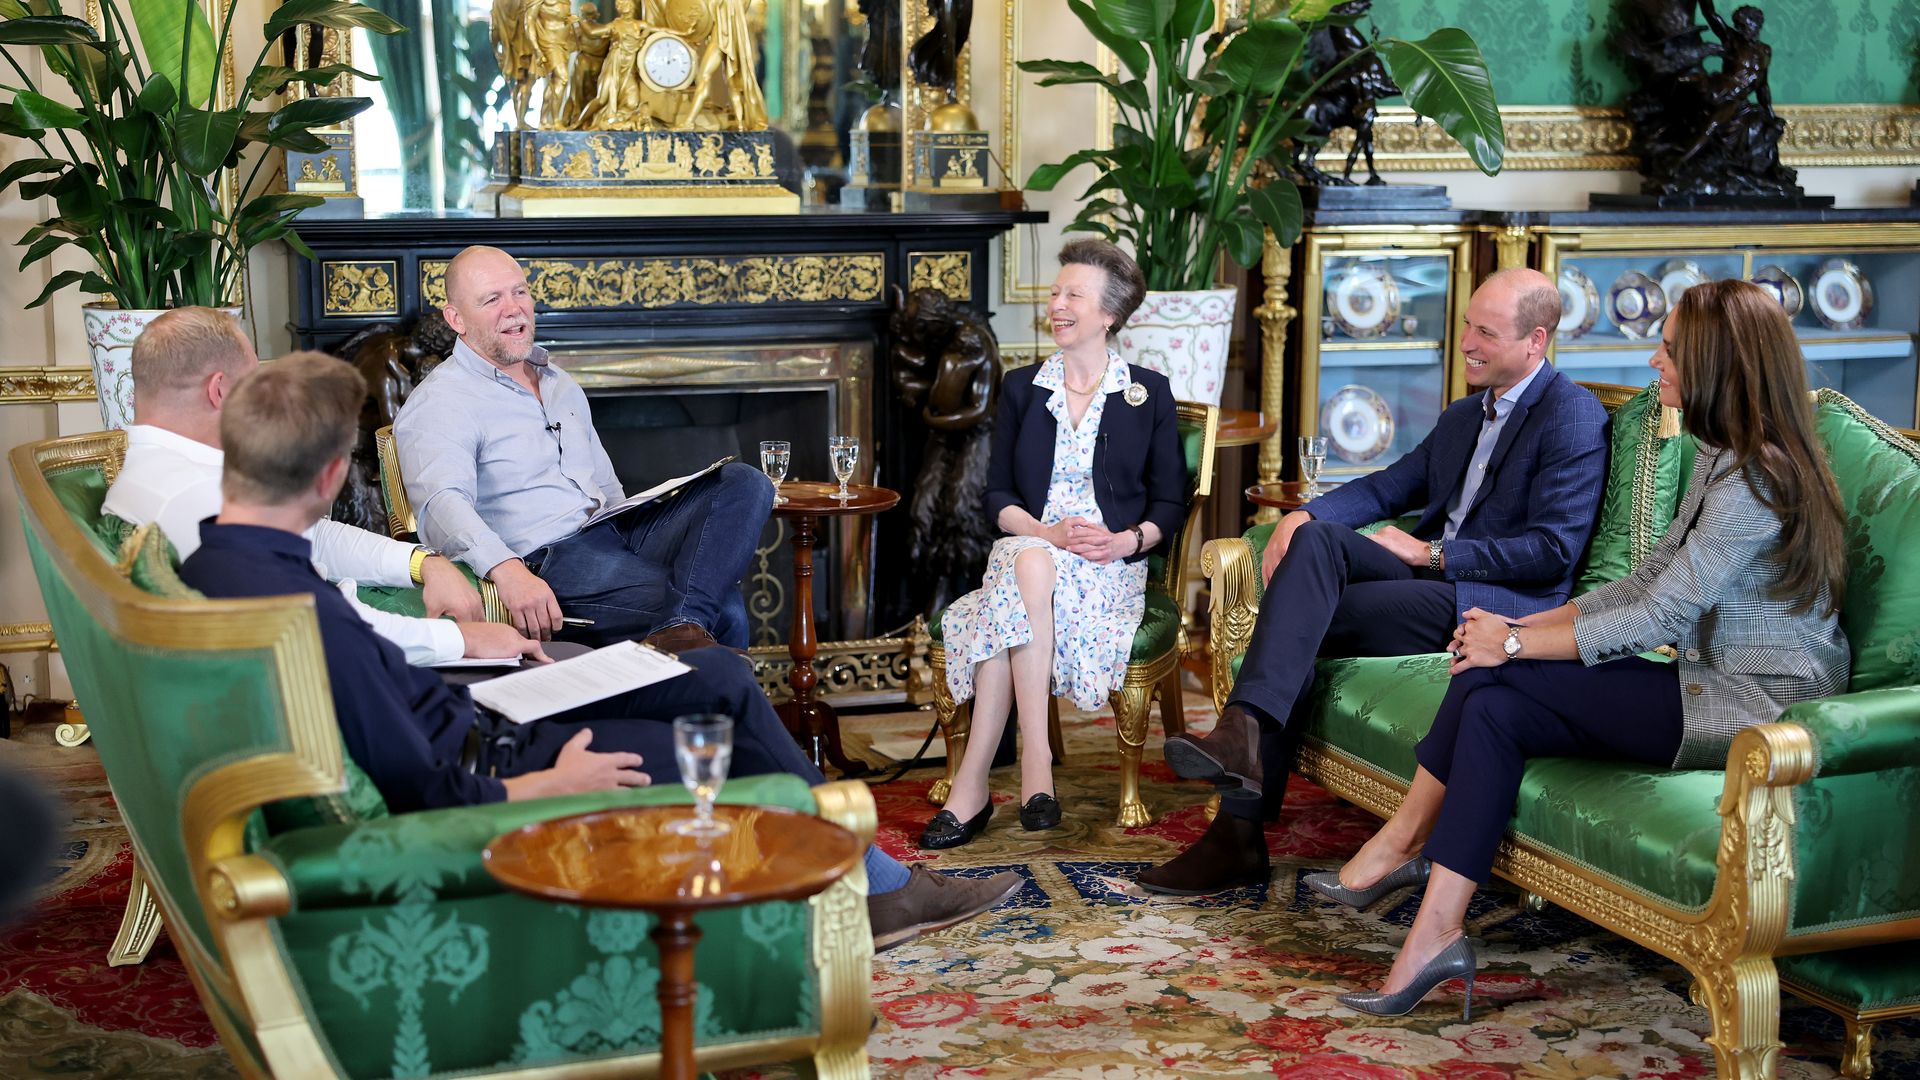 Mike Tindall, James Haskell, Prince William, Princess Kate and Princess Anne in Windsor castle 